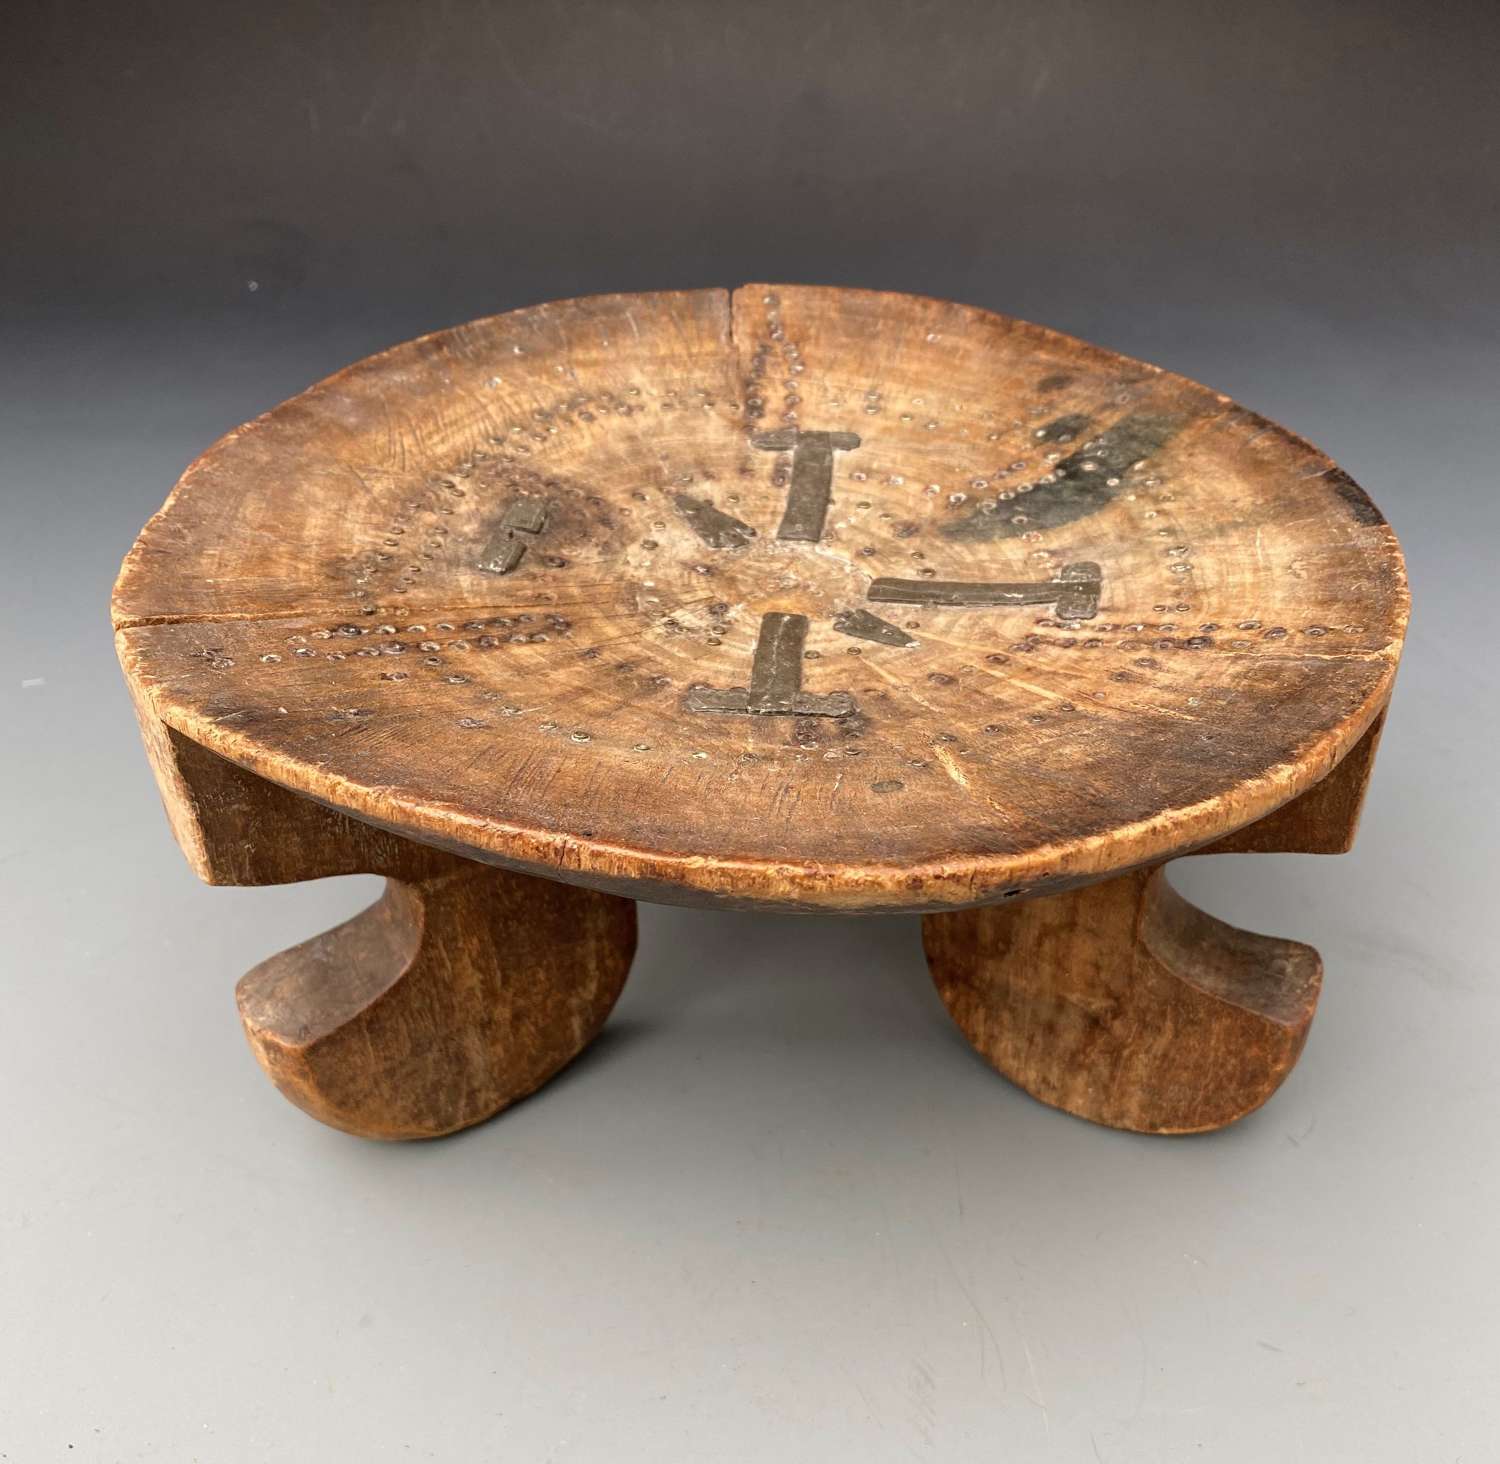 A Kamba Stool with Brass and Pewter designs Kenya 